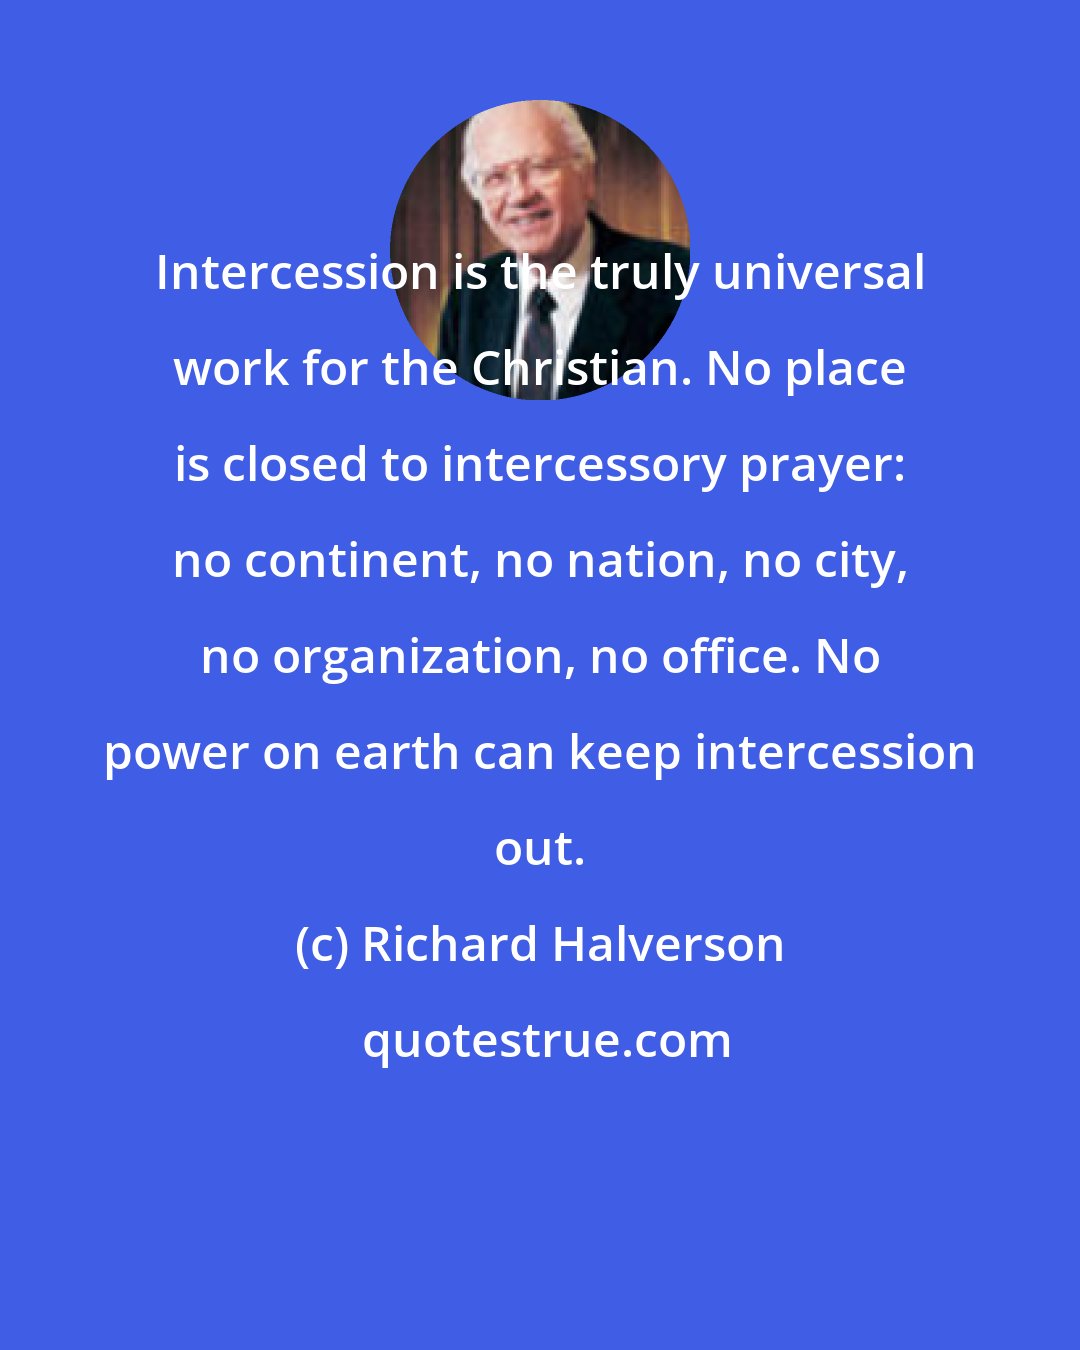 Richard Halverson: Intercession is the truly universal work for the Christian. No place is closed to intercessory prayer: no continent, no nation, no city, no organization, no office. No power on earth can keep intercession out.